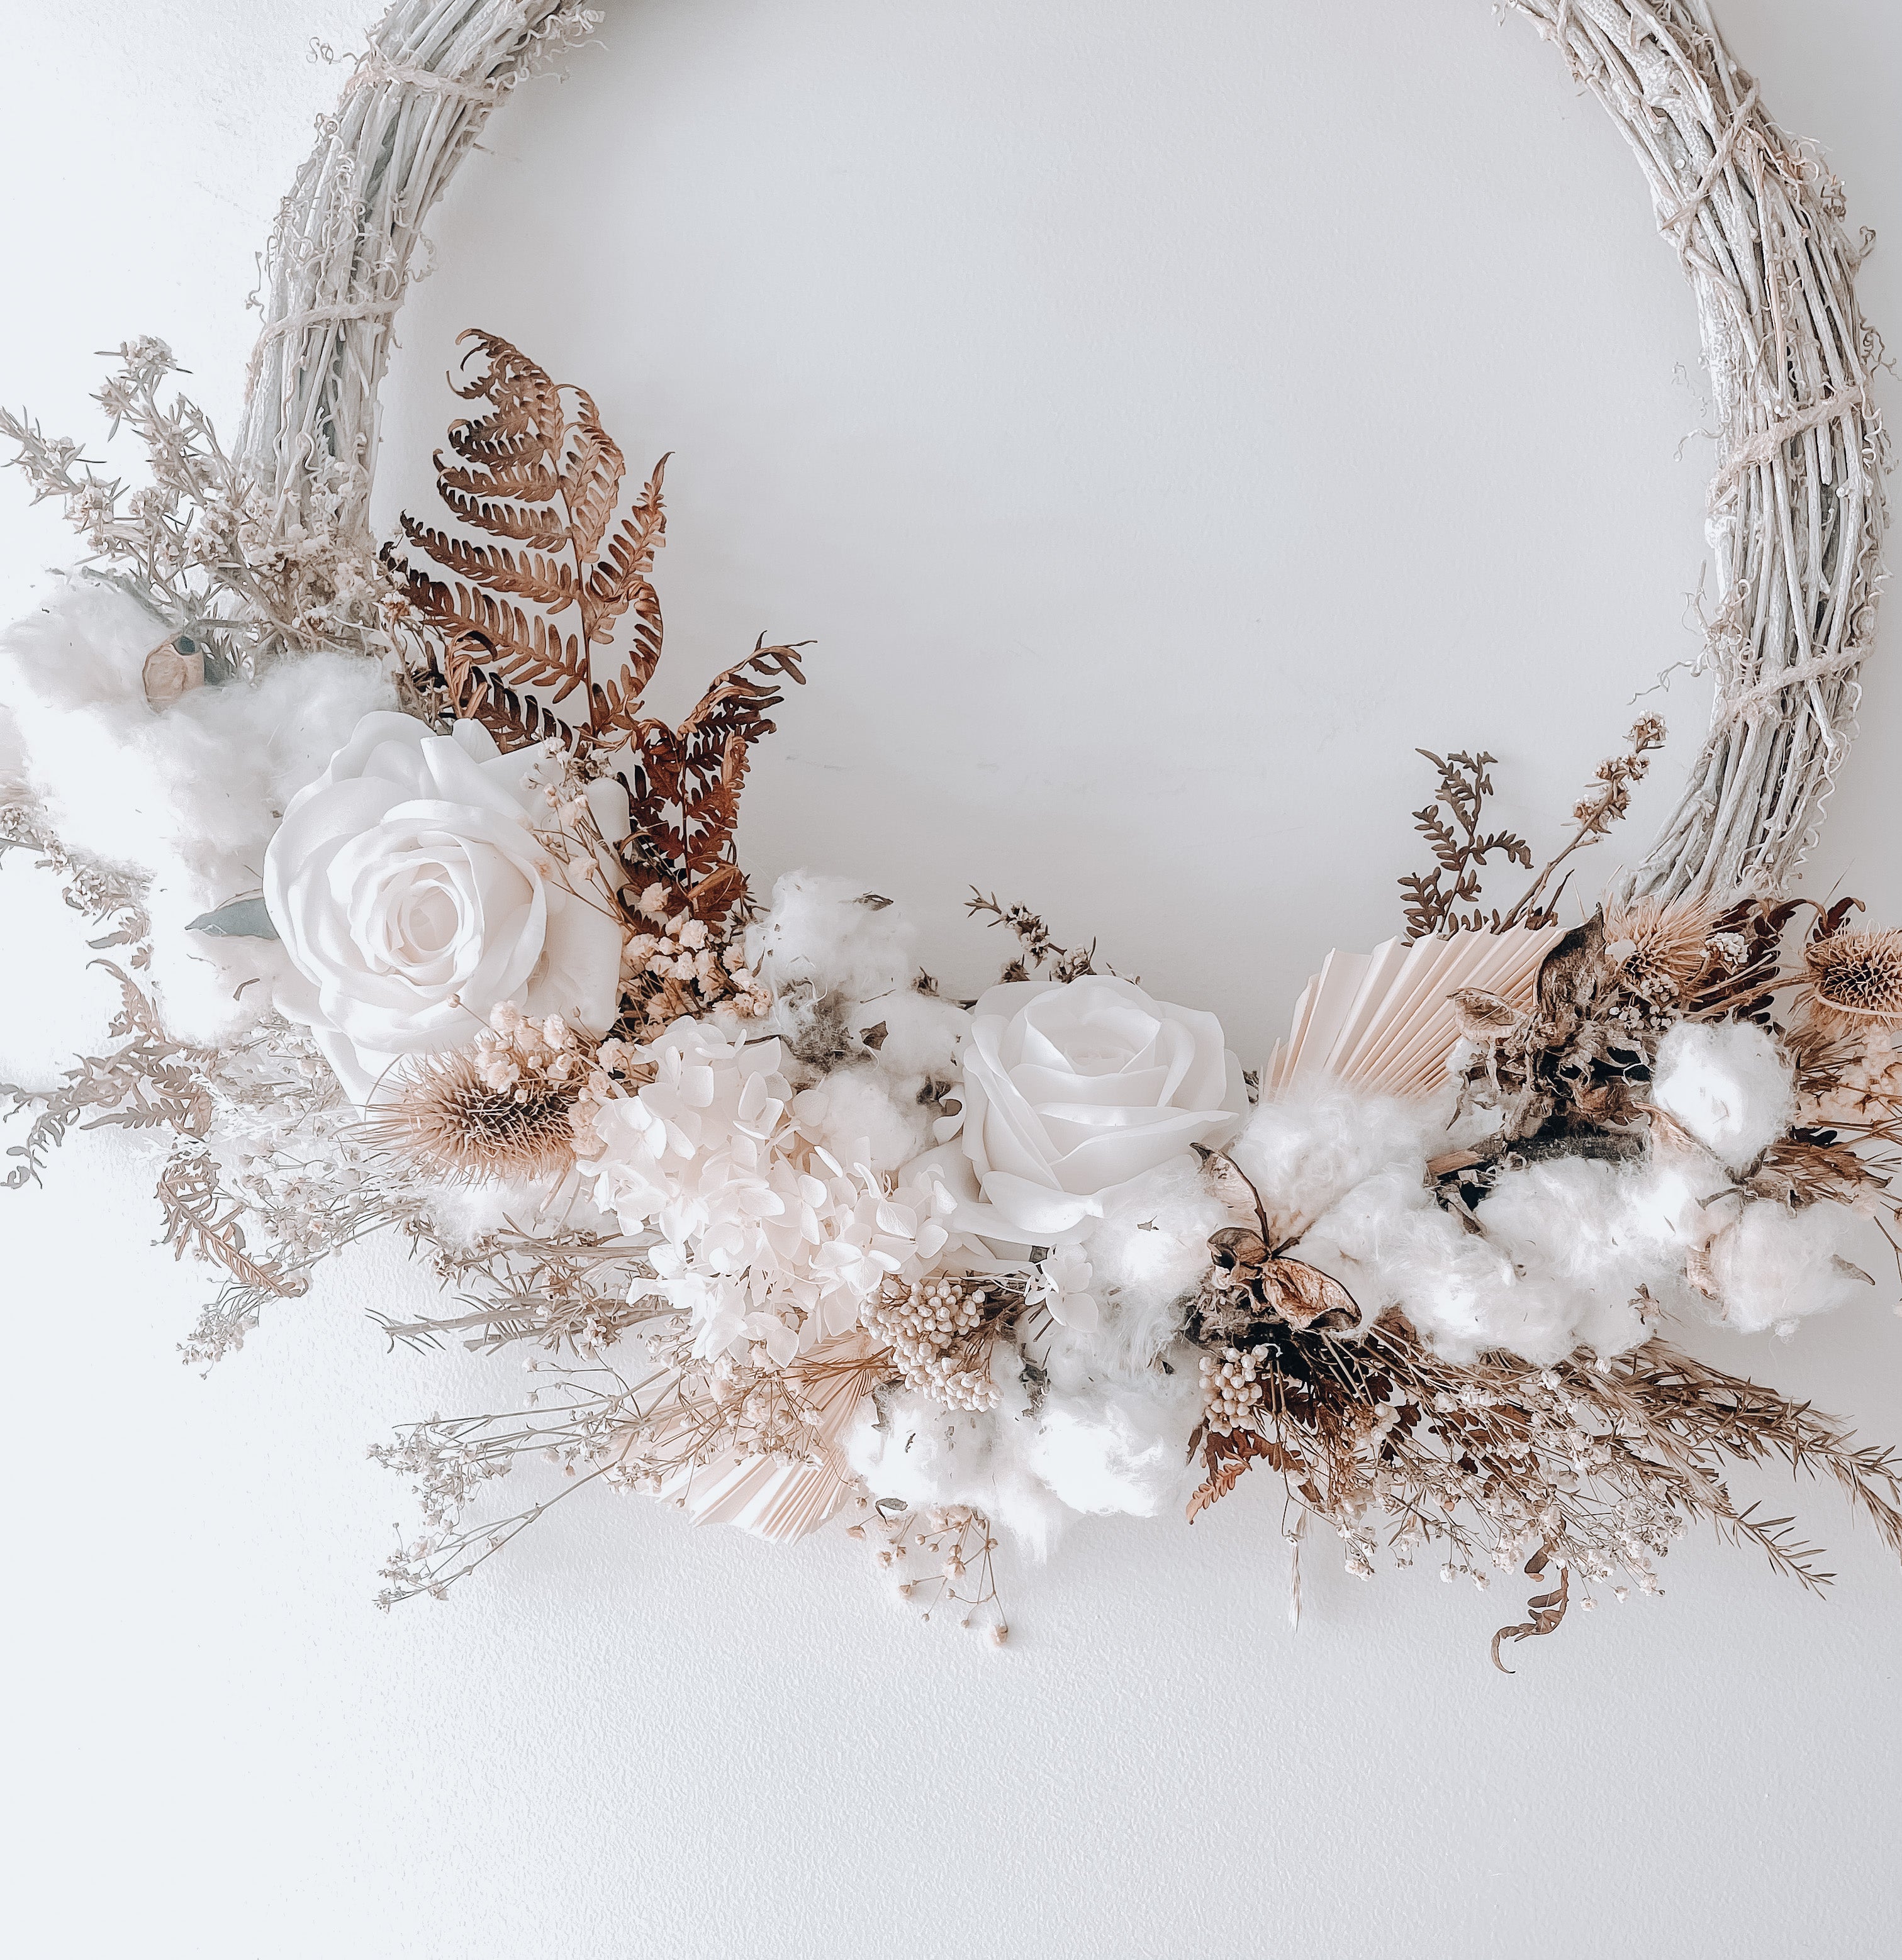 Everlasting floral wreath - snowy white rose.